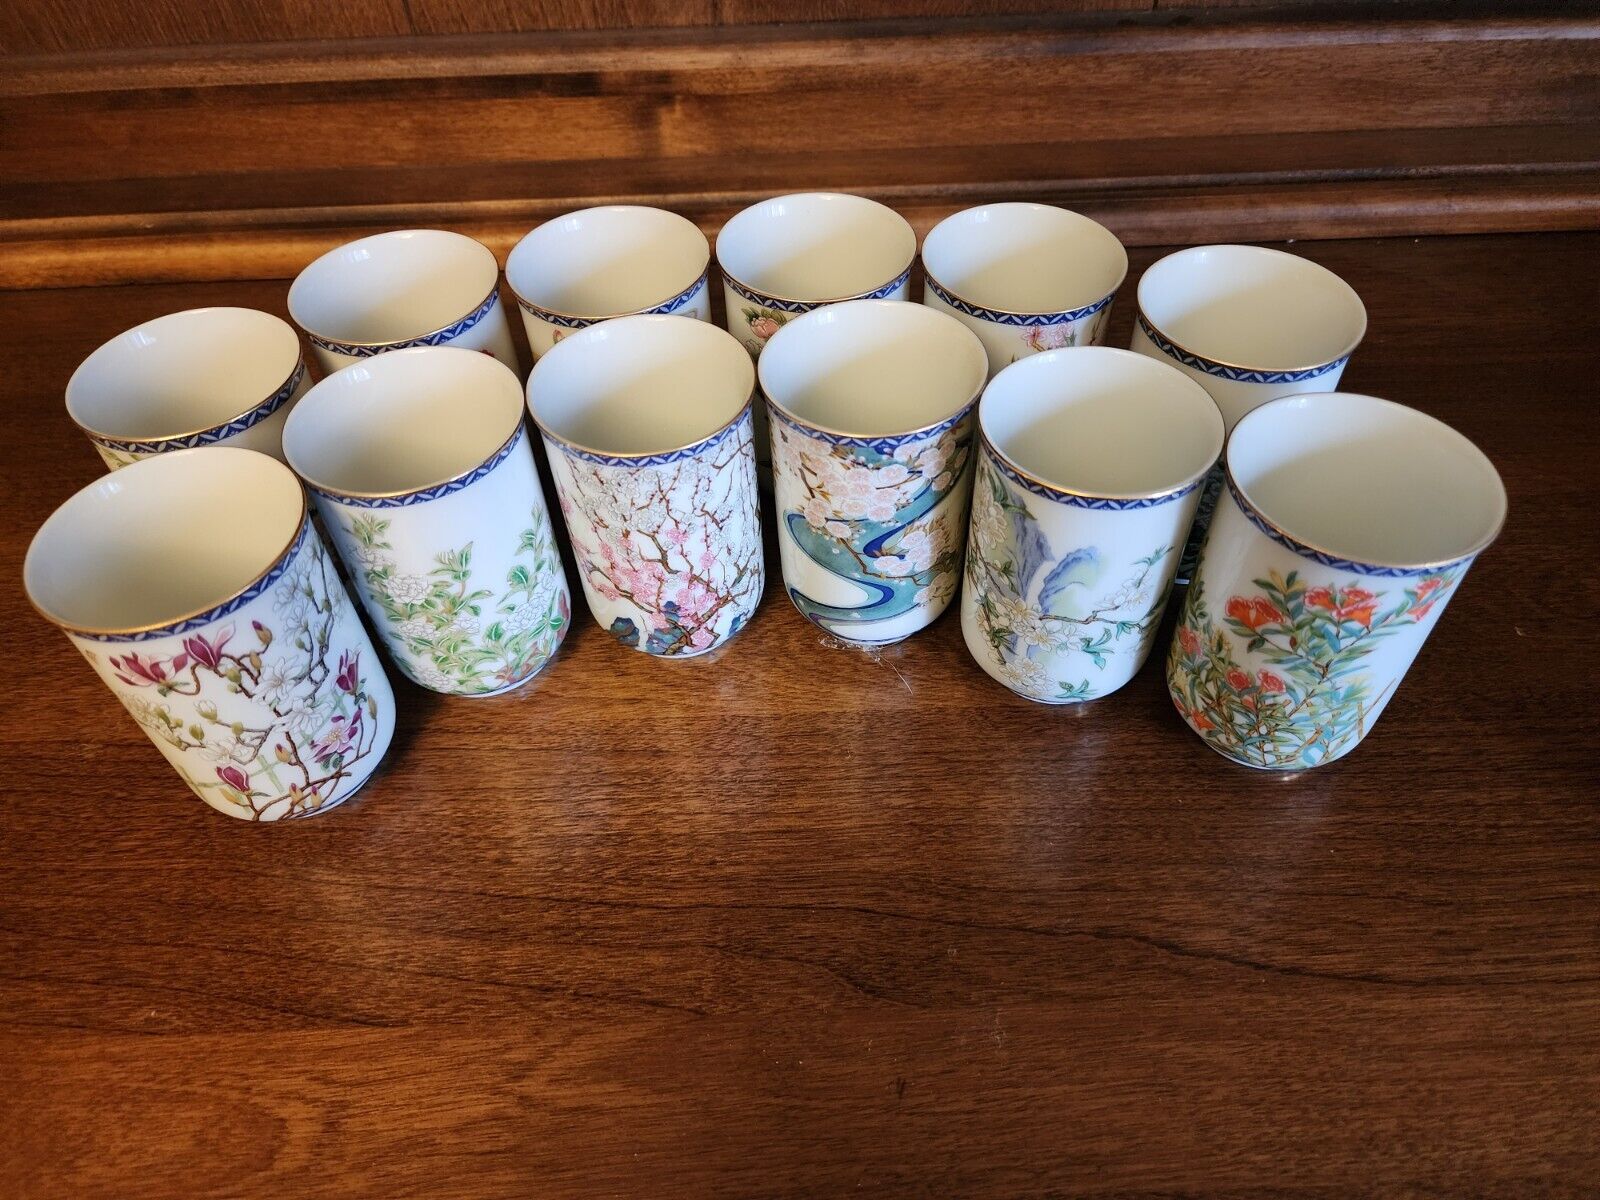 1981 FRANKLIN JAPANESE TEA CUP/SAKE 12 MONTHS OF THE YEAR FLOWERS Set of 12